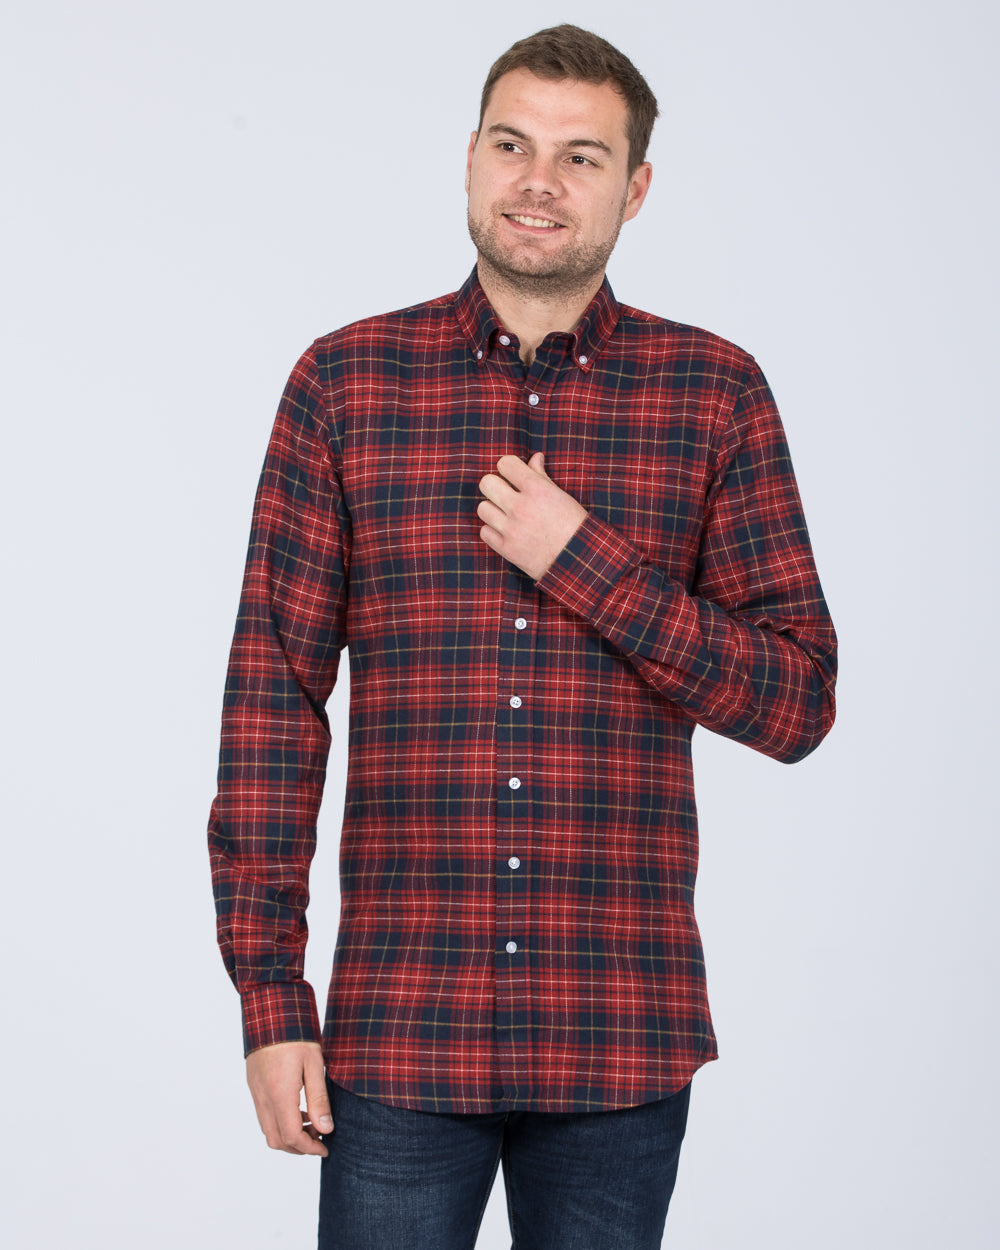 2t Slim Fit Long Sleeve Tall Checked Shirt (red/navy)